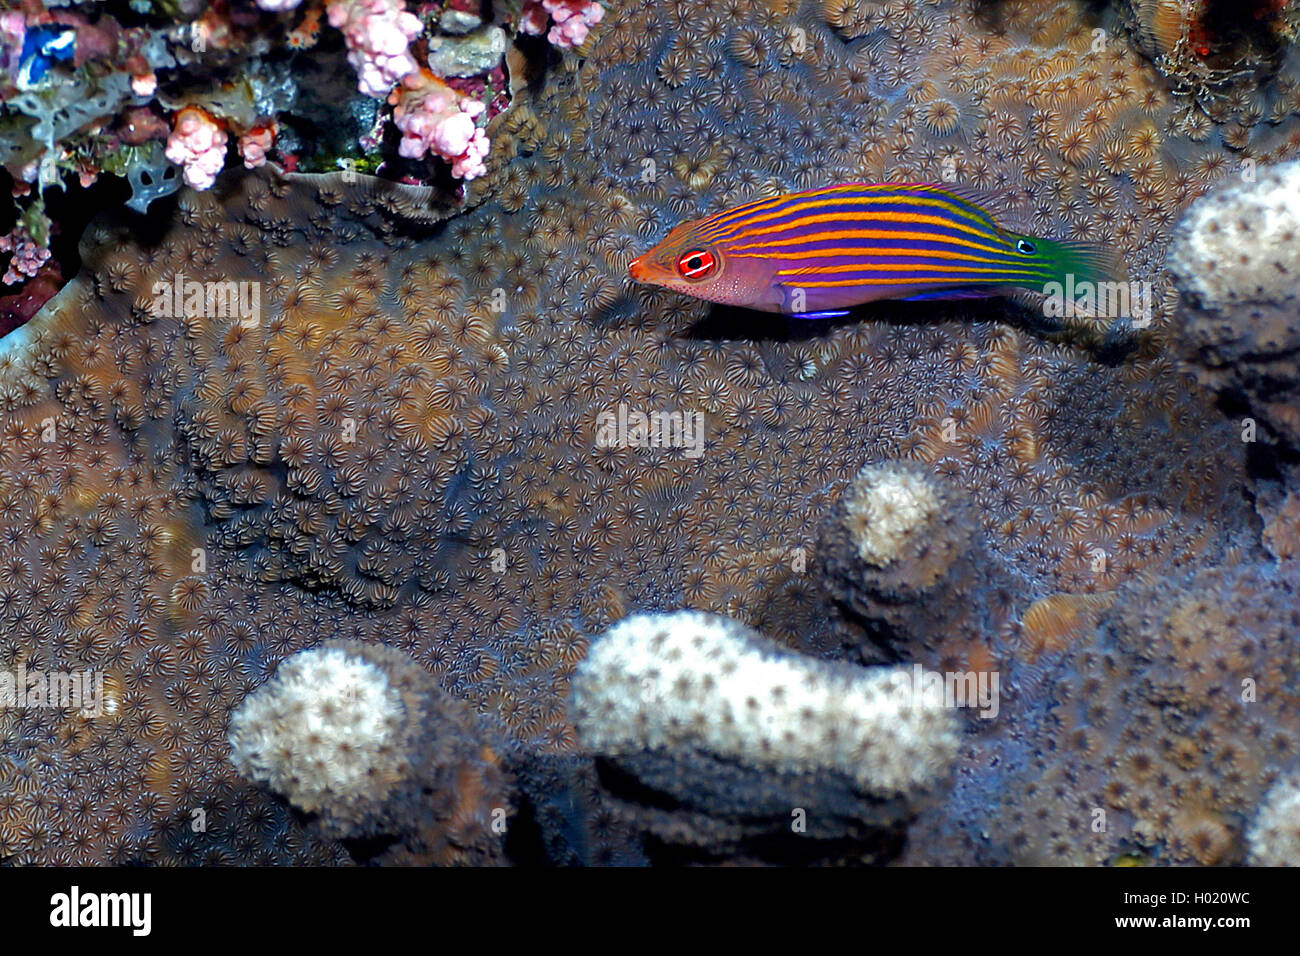 Six-line wrasse (Pseudocheilinus hexataenia), at coral reef, Egypt, Red Sea Stock Photo